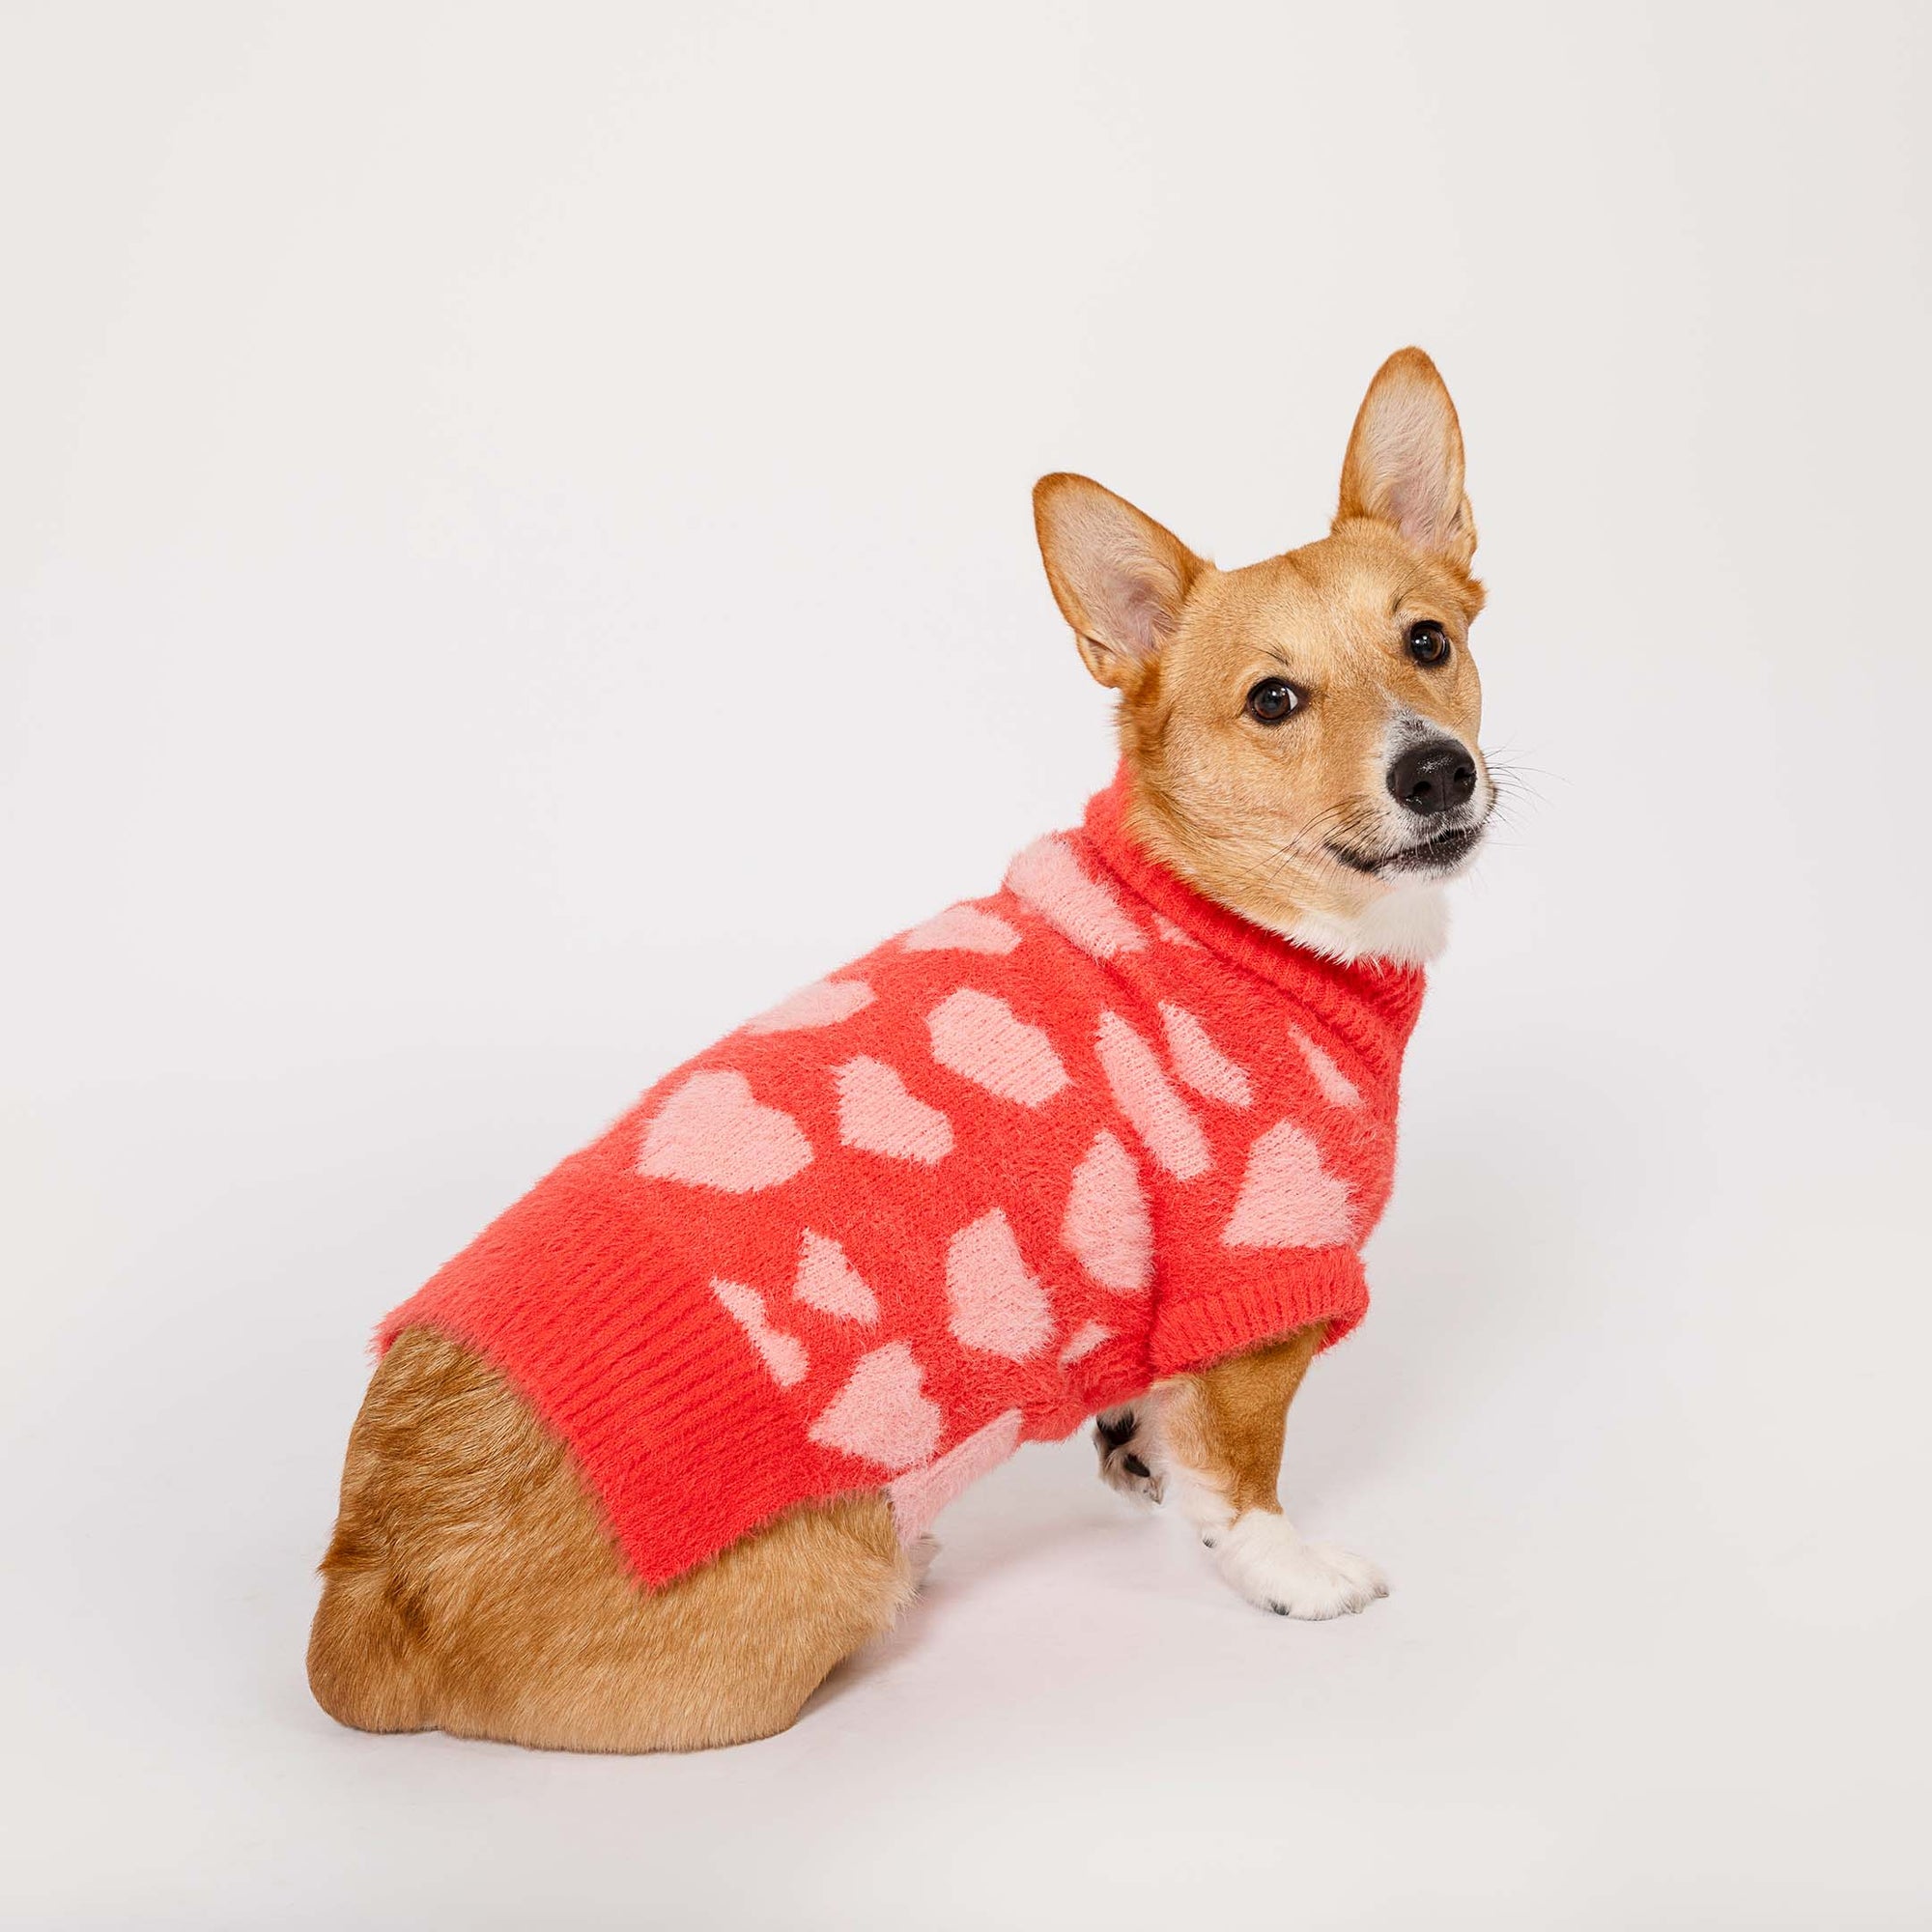 Alert Corgi dog in a vibrant red and pink heart-patterned sweater, looking off-camera with a smart expression, against a clean white background.